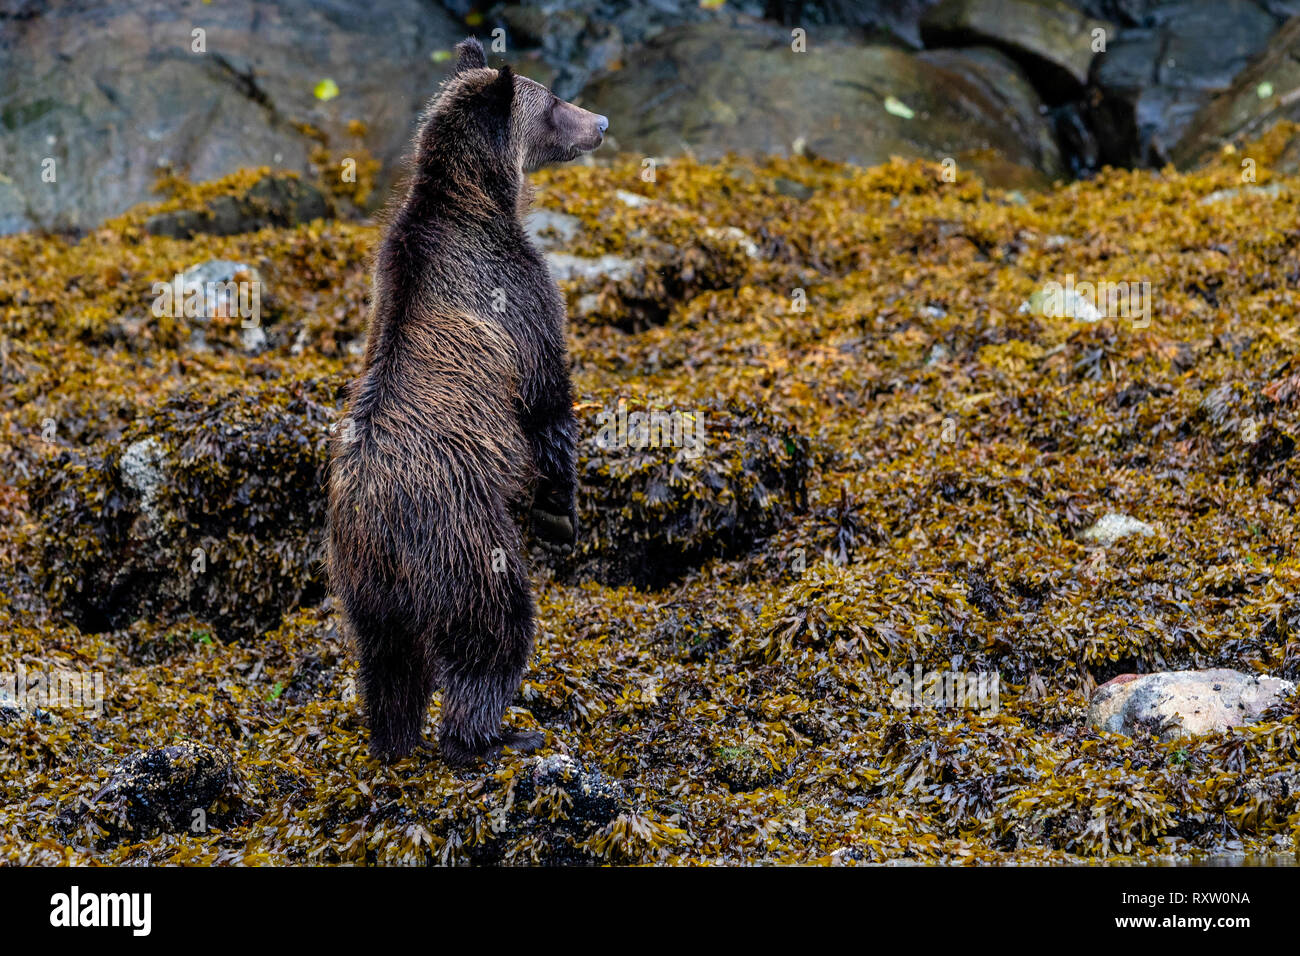 Coastal grizzy bear stabding on its hind legs along the low tide line in Knight Inlet, First Nations Territory, British Columbia, Canada. Stock Photo